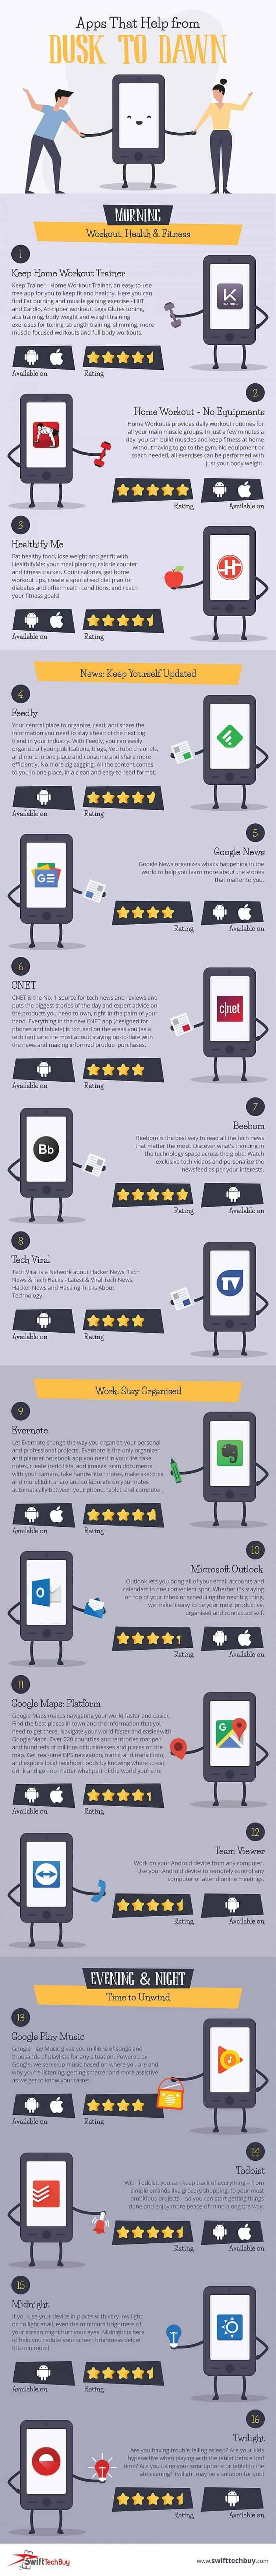 Apps that Help from Dusk to Dawn (Infographic)